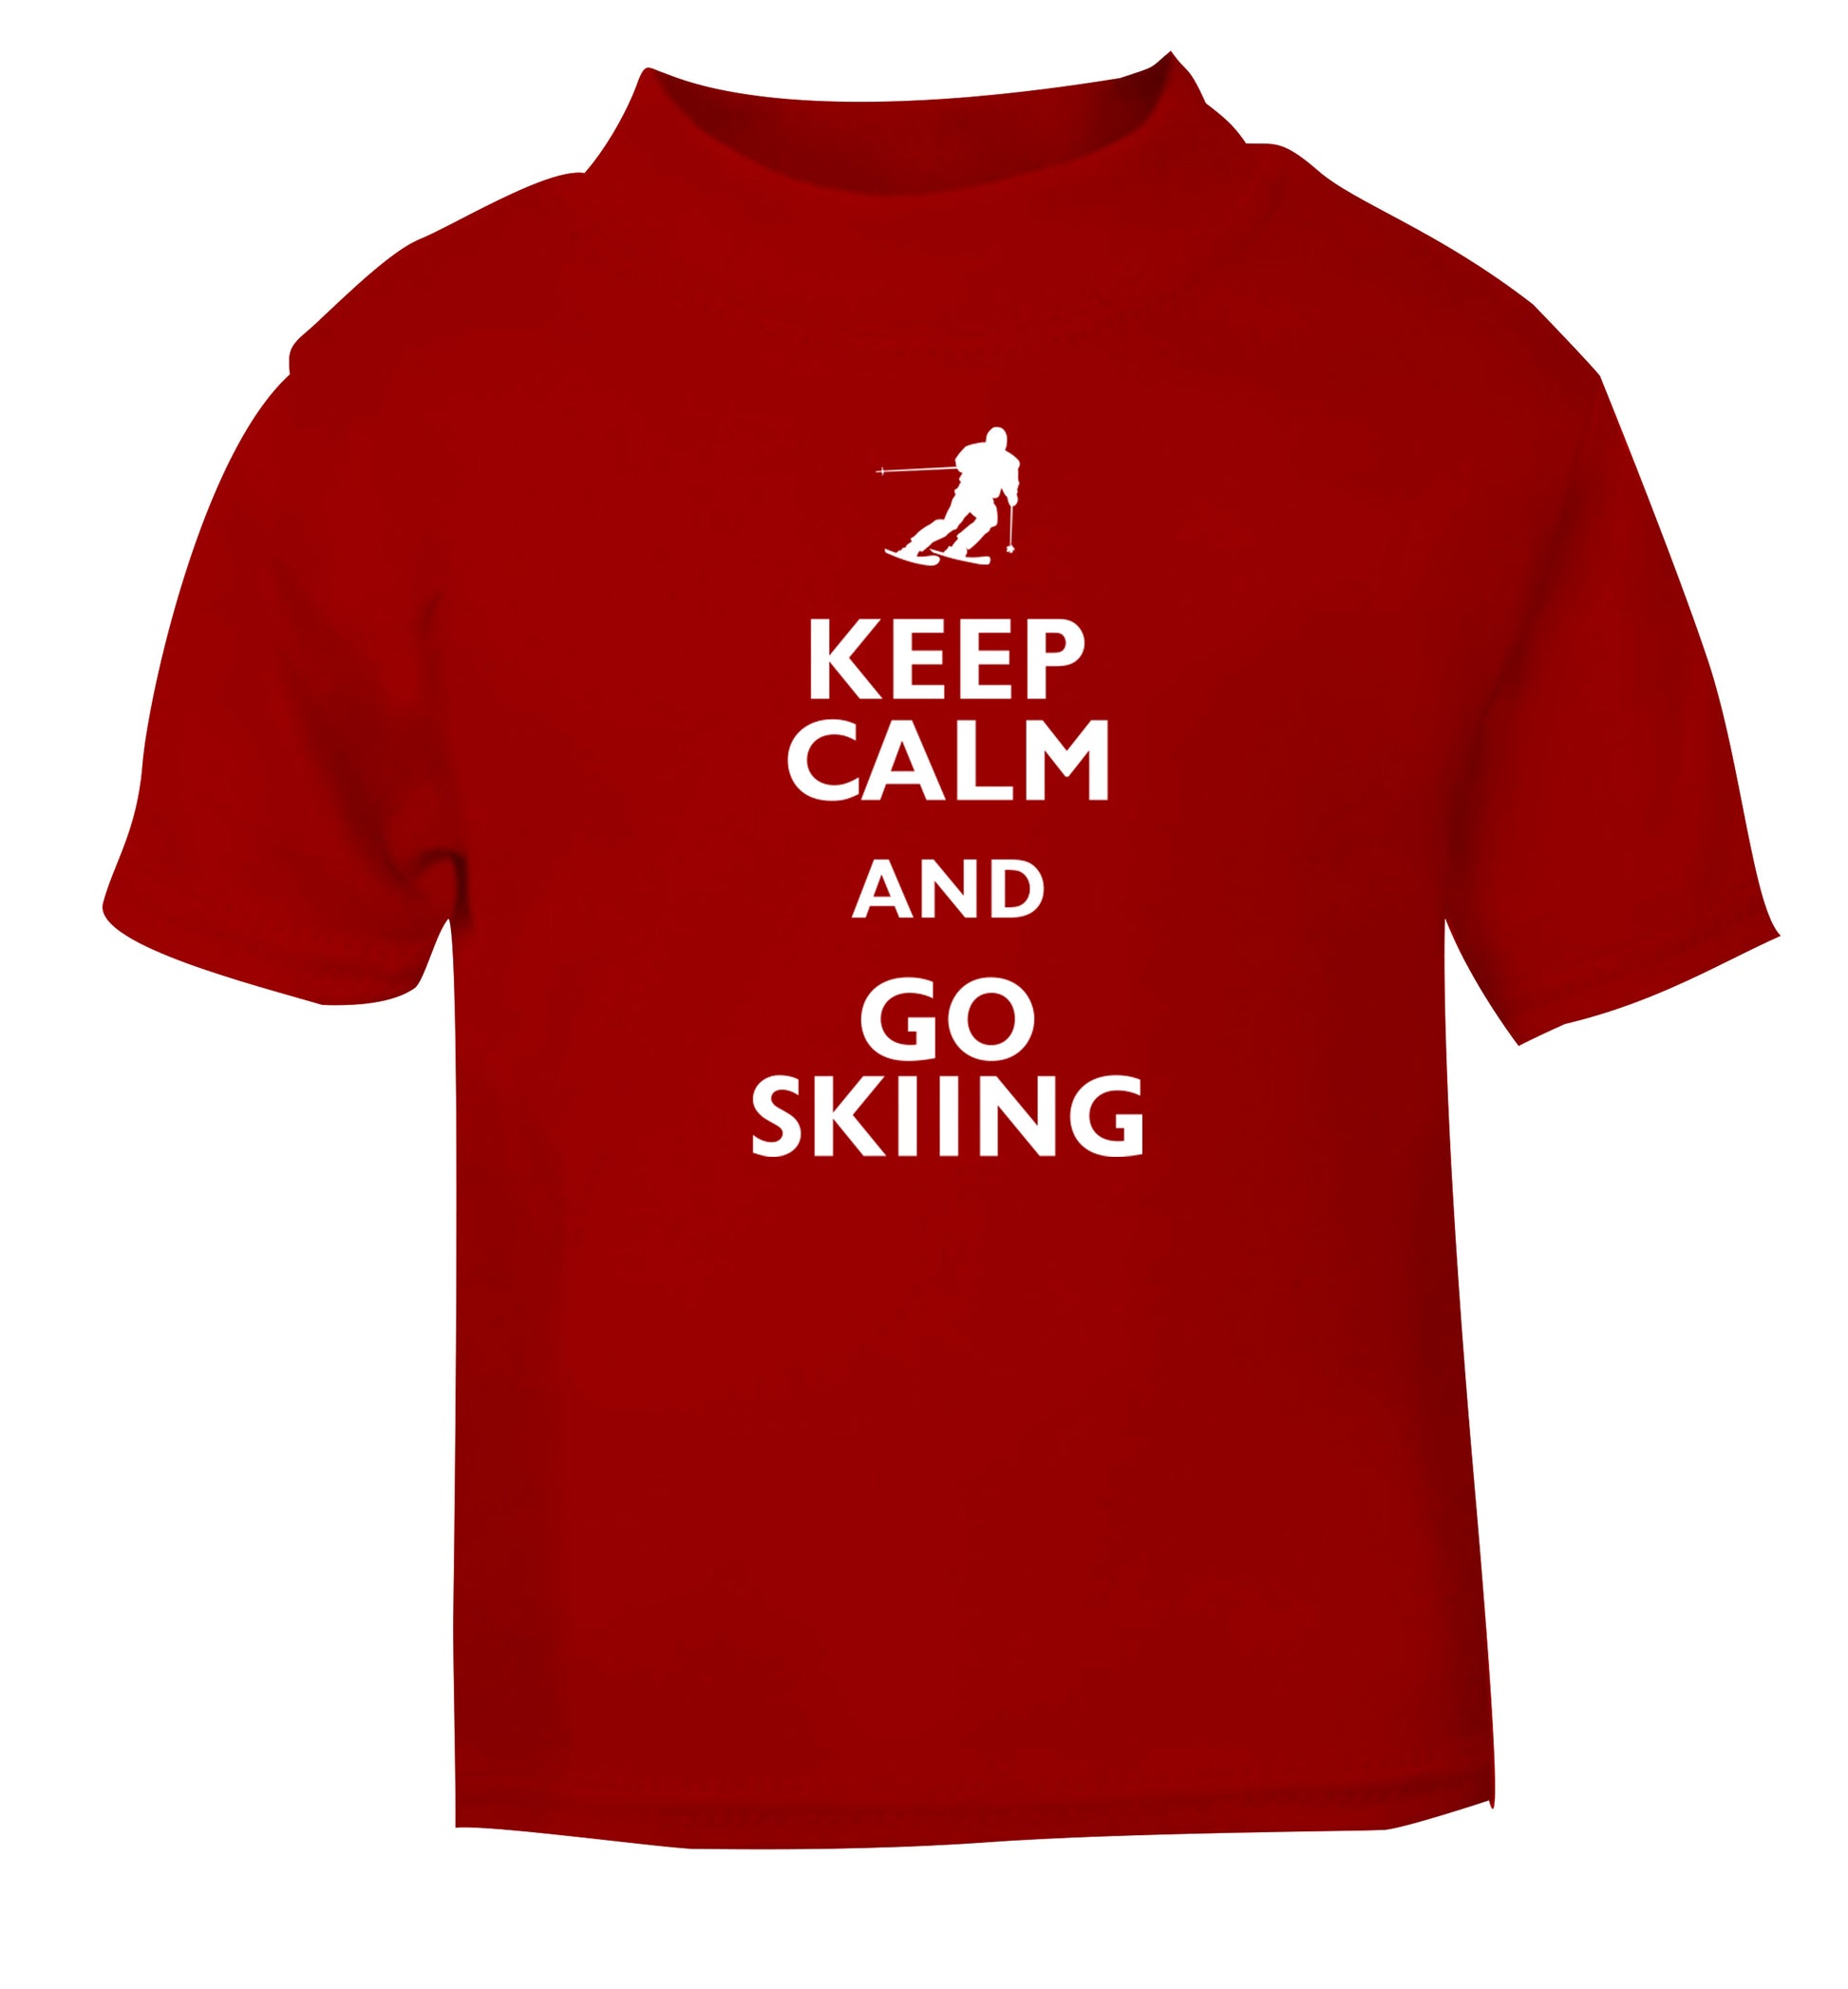 Keep calm and go skiing red Baby Toddler Tshirt 2 Years